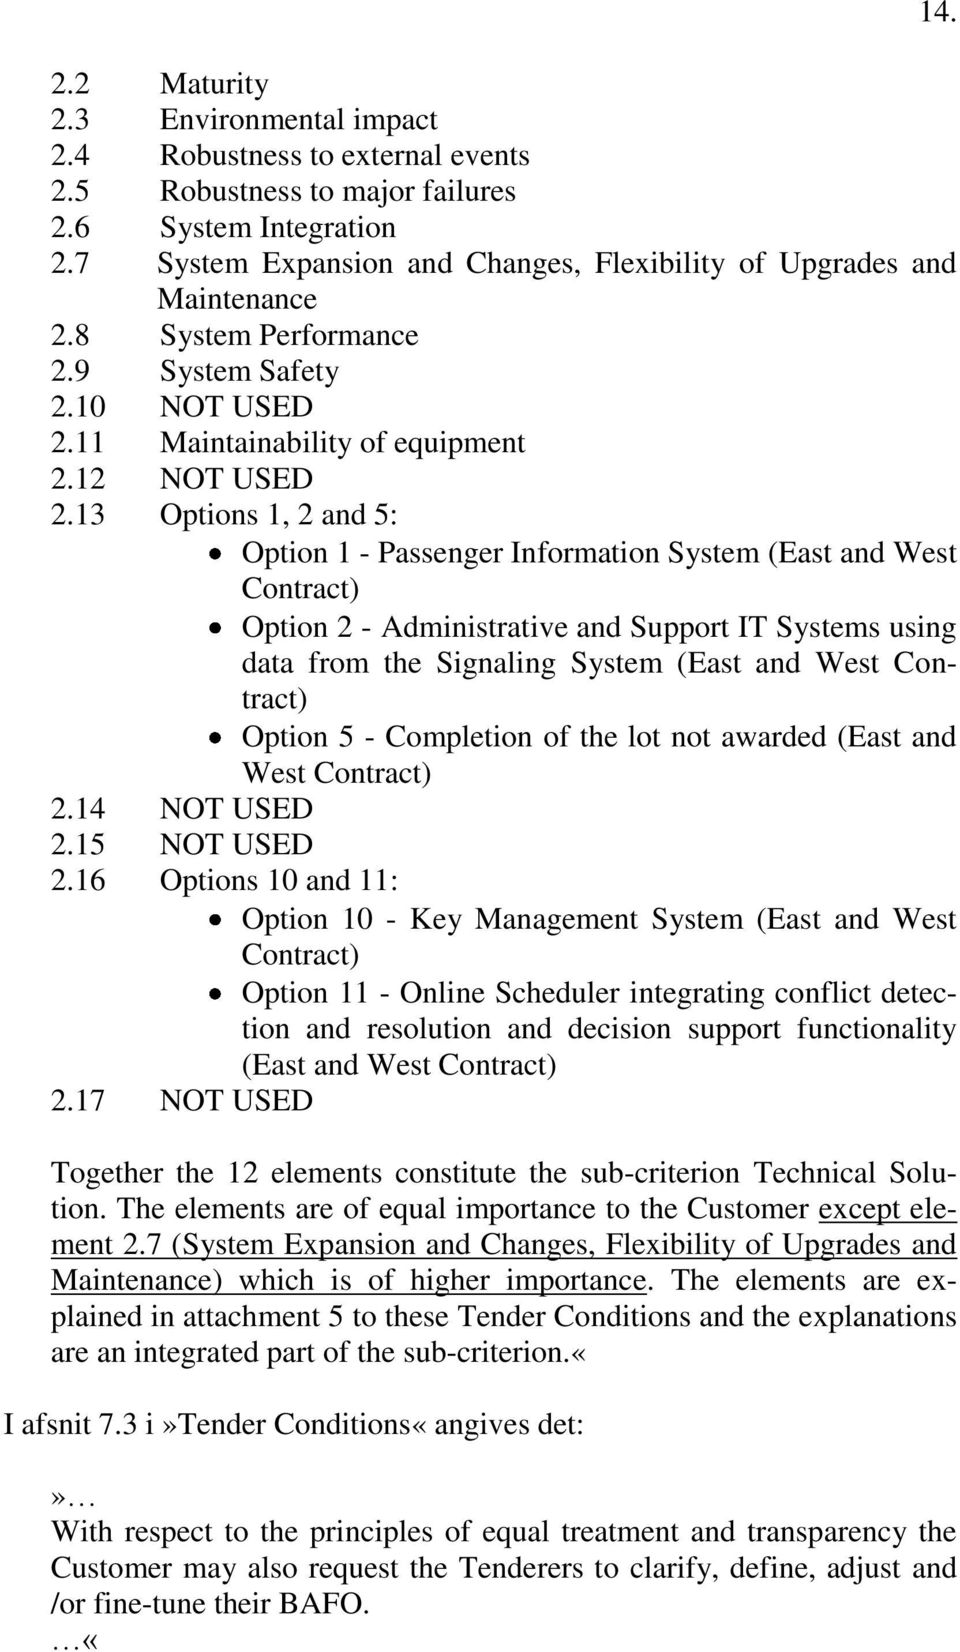 13 Options 1, 2 and 5: Option 1 - Passenger Information System (East and West Contract) Option 2 - Administrative and Support IT Systems using data from the Signaling System (East and West Contract)